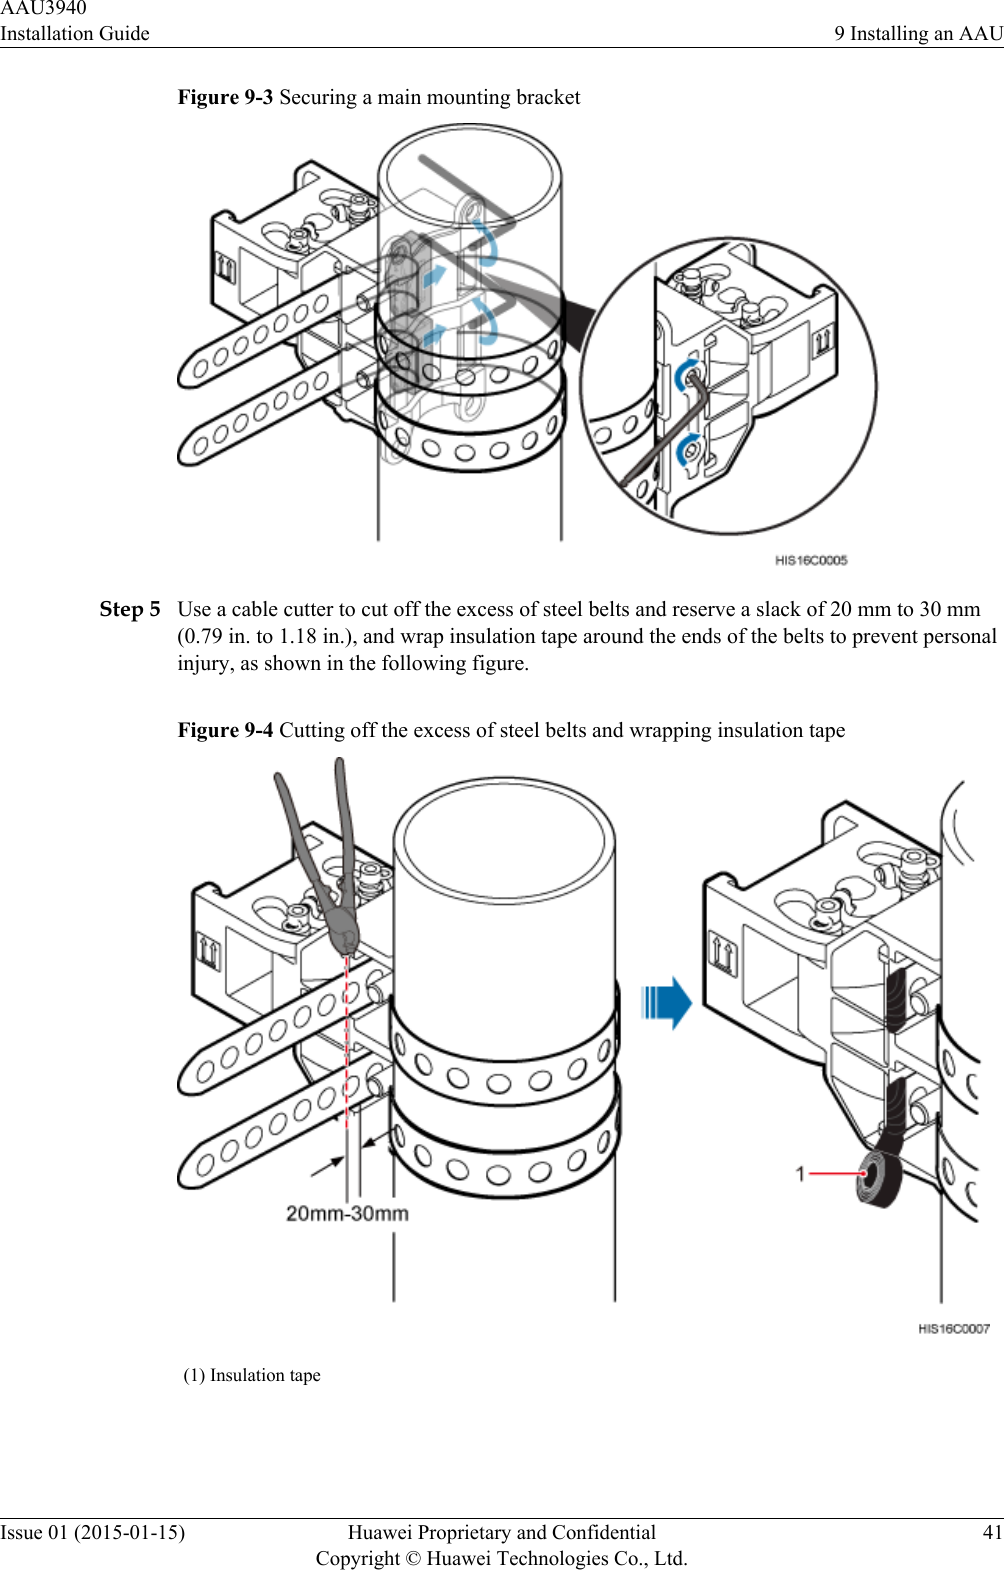 Figure 9-3 Securing a main mounting bracketStep 5 Use a cable cutter to cut off the excess of steel belts and reserve a slack of 20 mm to 30 mm(0.79 in. to 1.18 in.), and wrap insulation tape around the ends of the belts to prevent personalinjury, as shown in the following figure.Figure 9-4 Cutting off the excess of steel belts and wrapping insulation tape(1) Insulation tape AAU3940Installation Guide 9 Installing an AAUIssue 01 (2015-01-15) Huawei Proprietary and ConfidentialCopyright © Huawei Technologies Co., Ltd.41